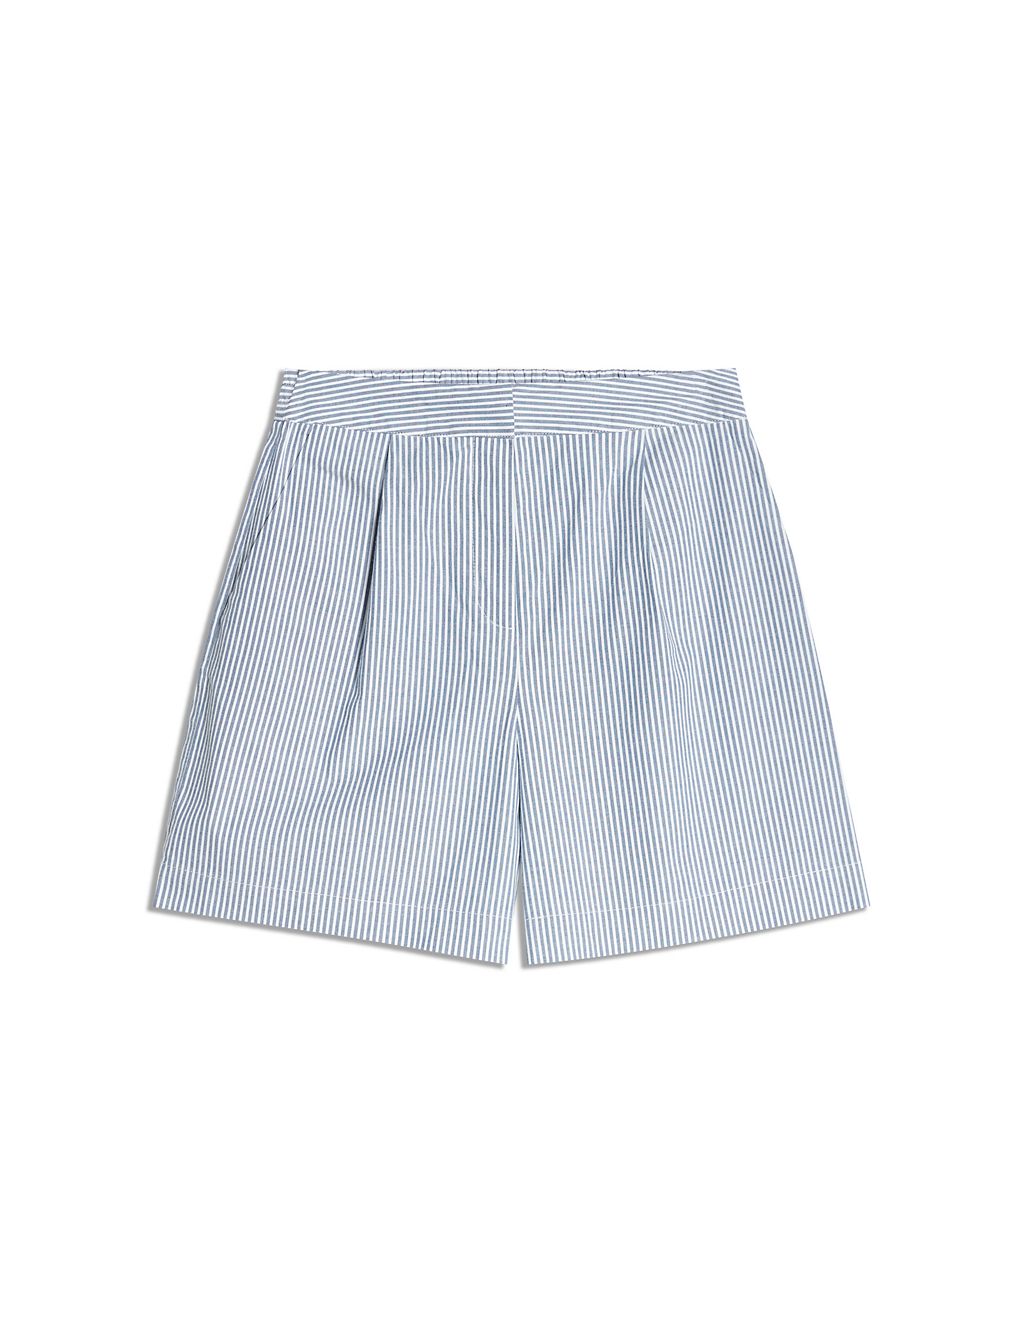 Cotton Rich Striped Shorts 1 of 5